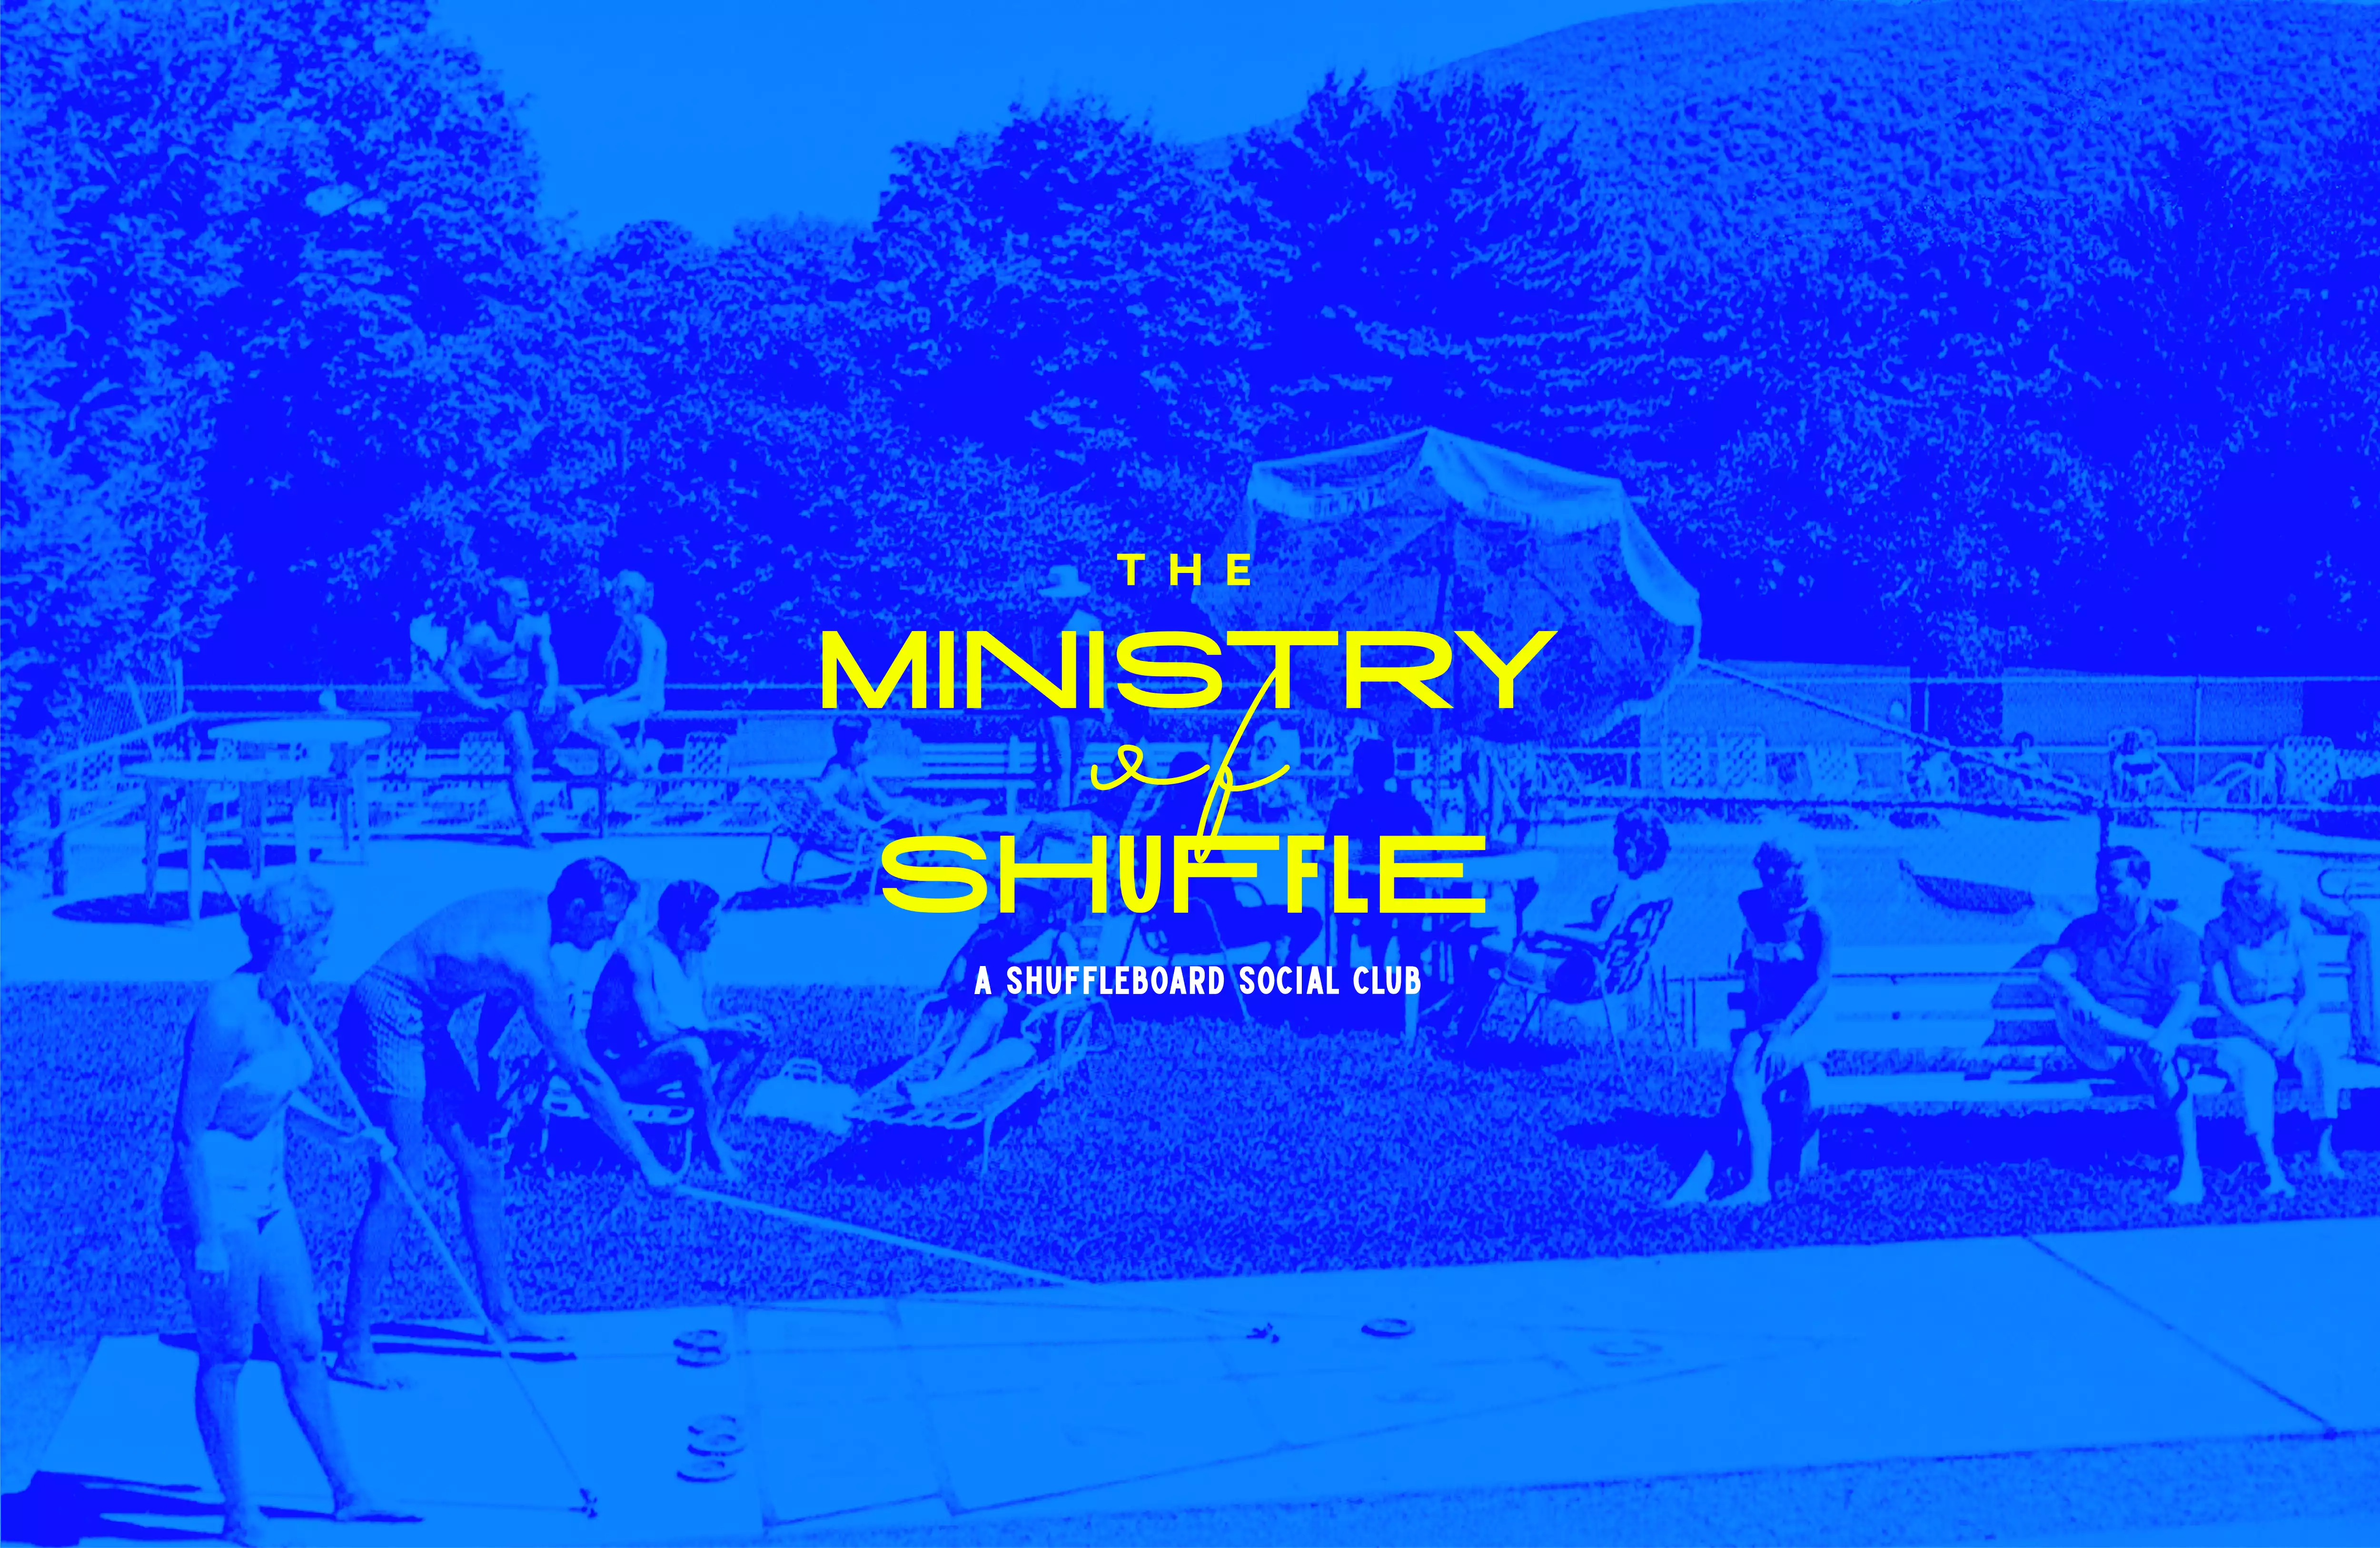 The Ministry Of Shuffle Brand Imagery